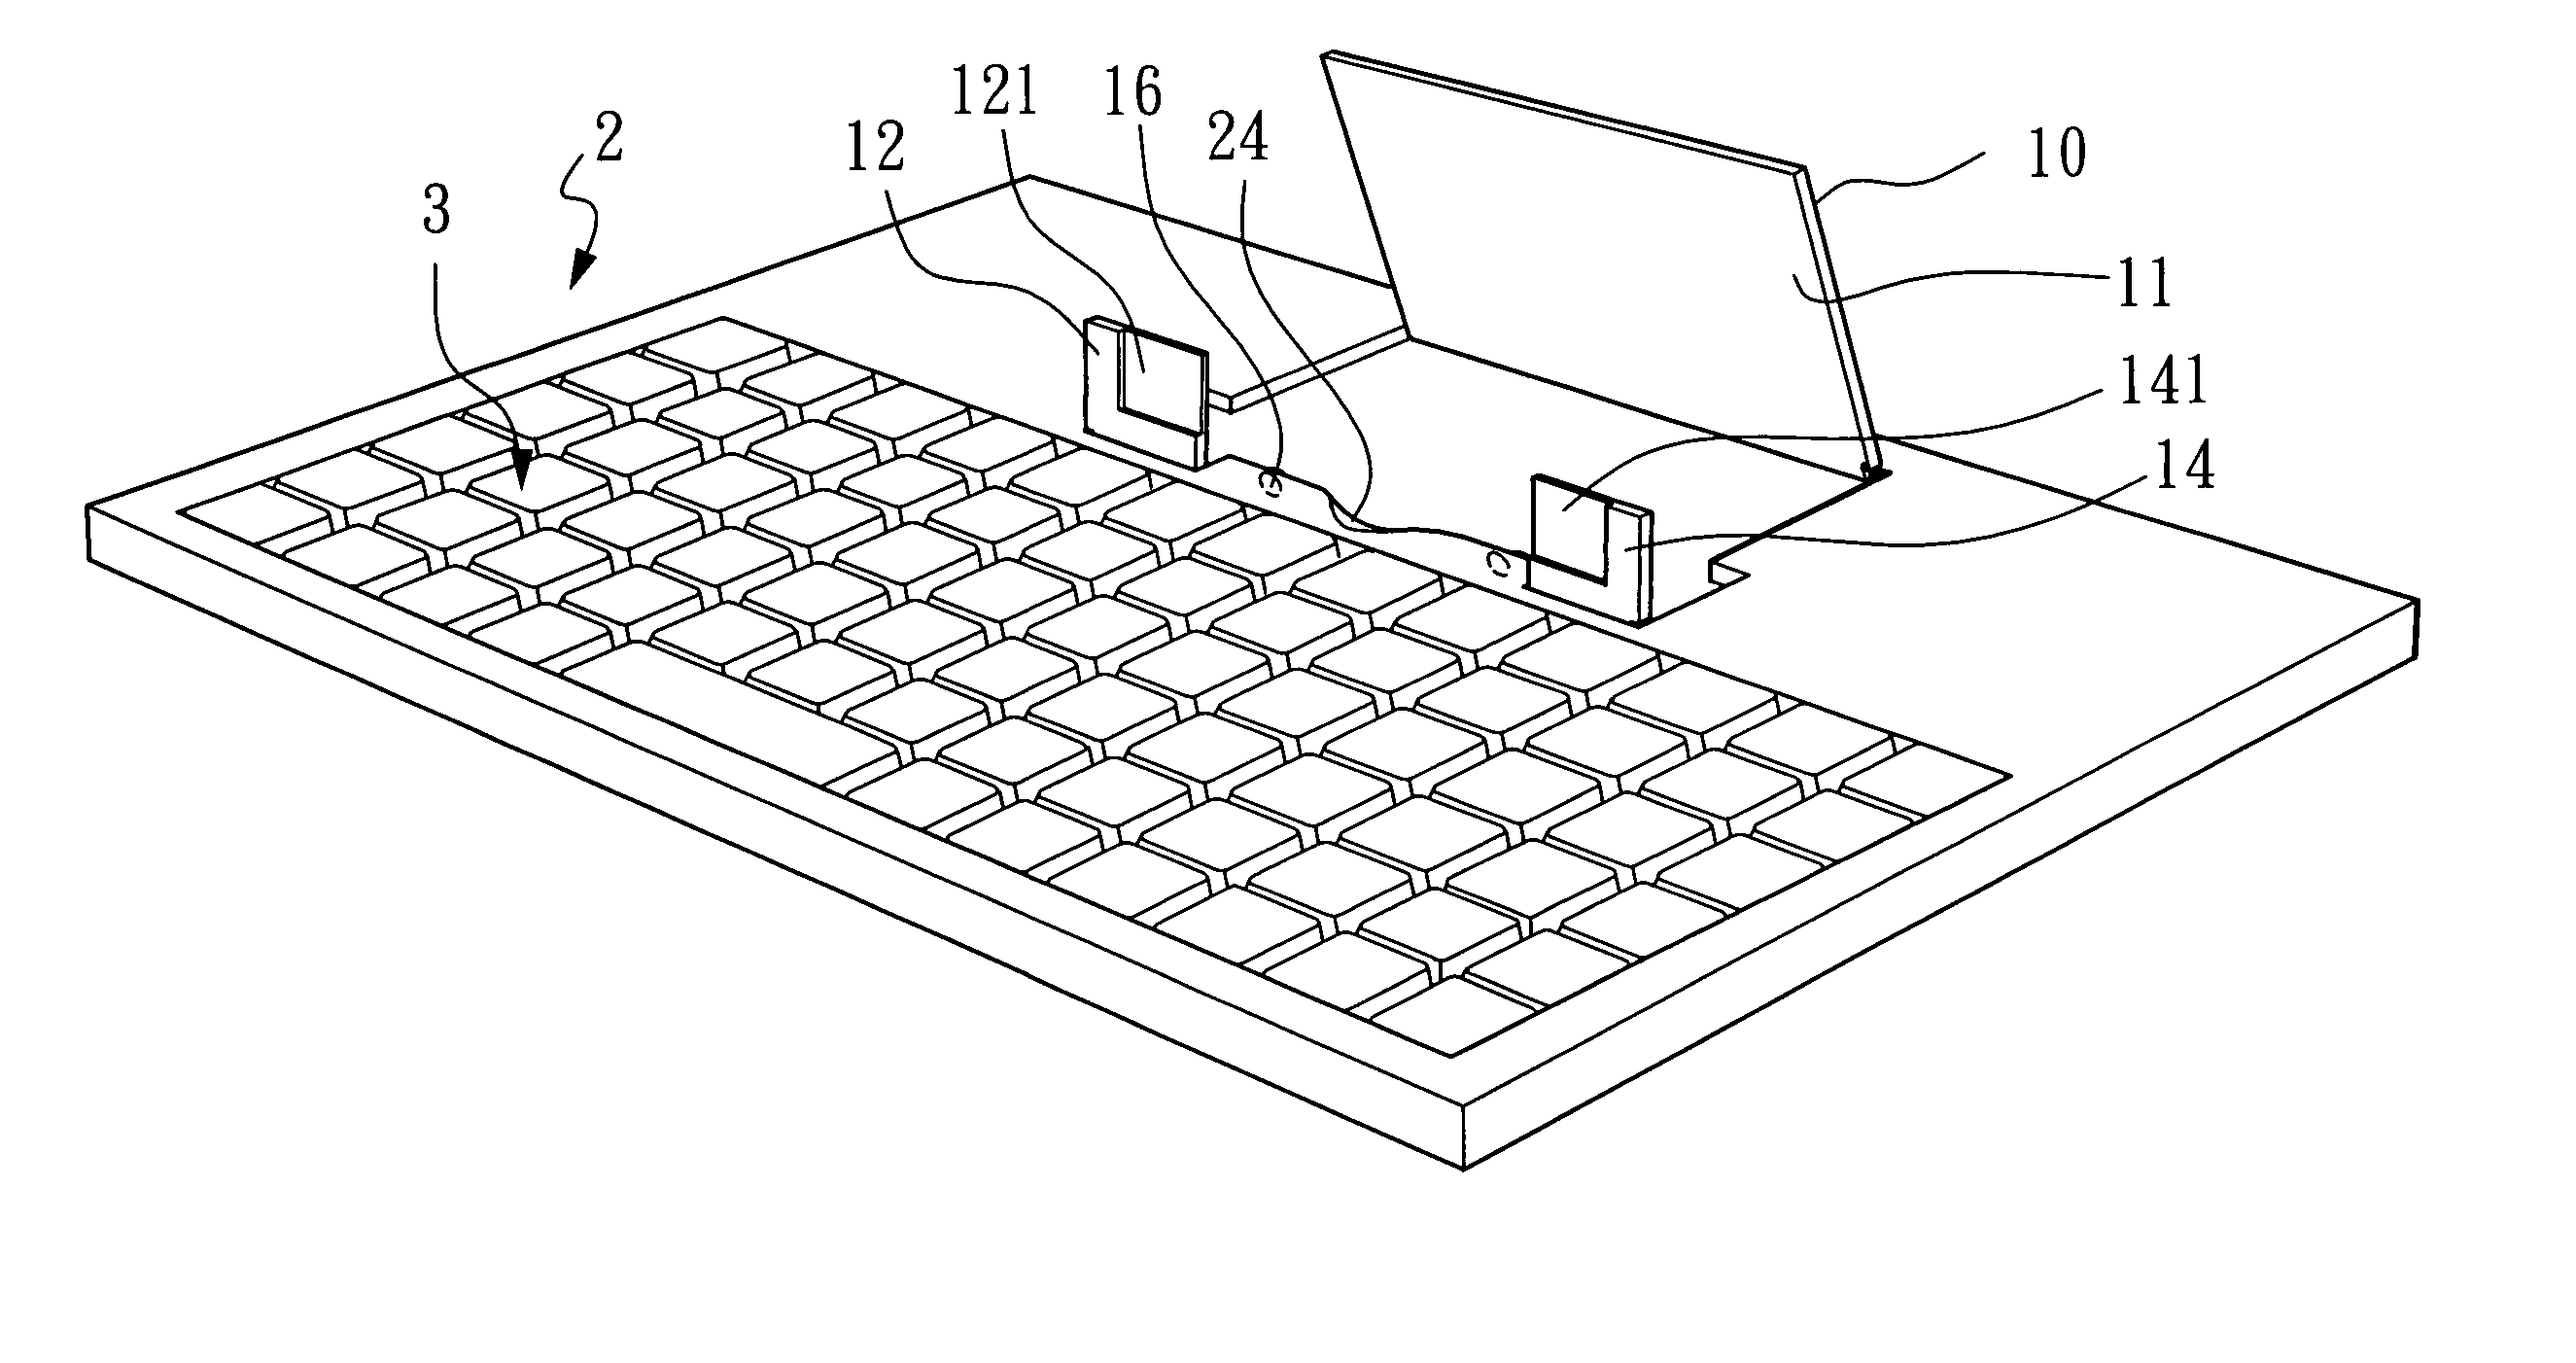 Support structure of a portable keyboard